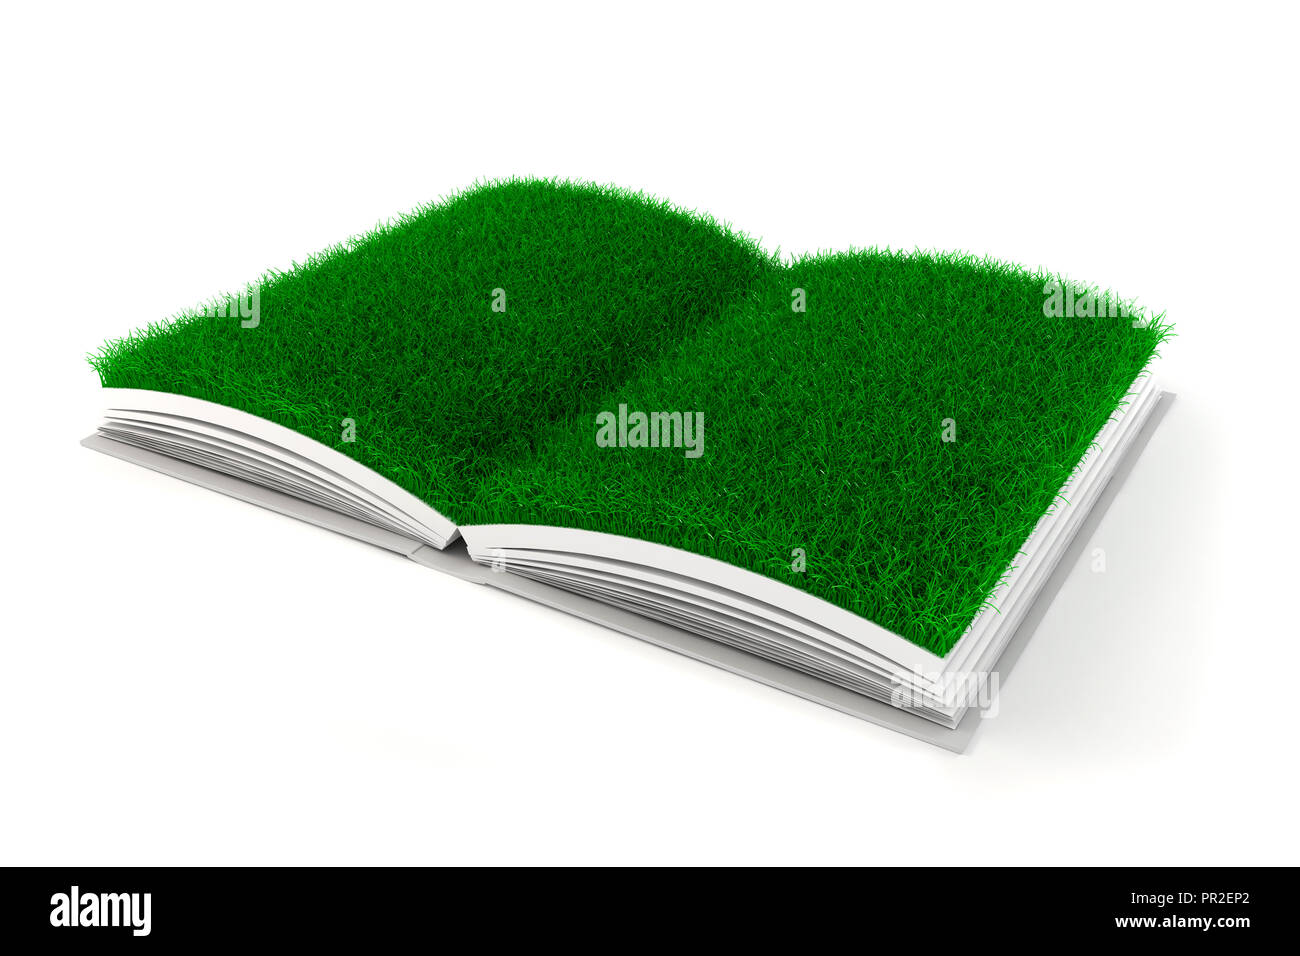 763,890 Open Book Images, Stock Photos, 3D objects, & Vectors